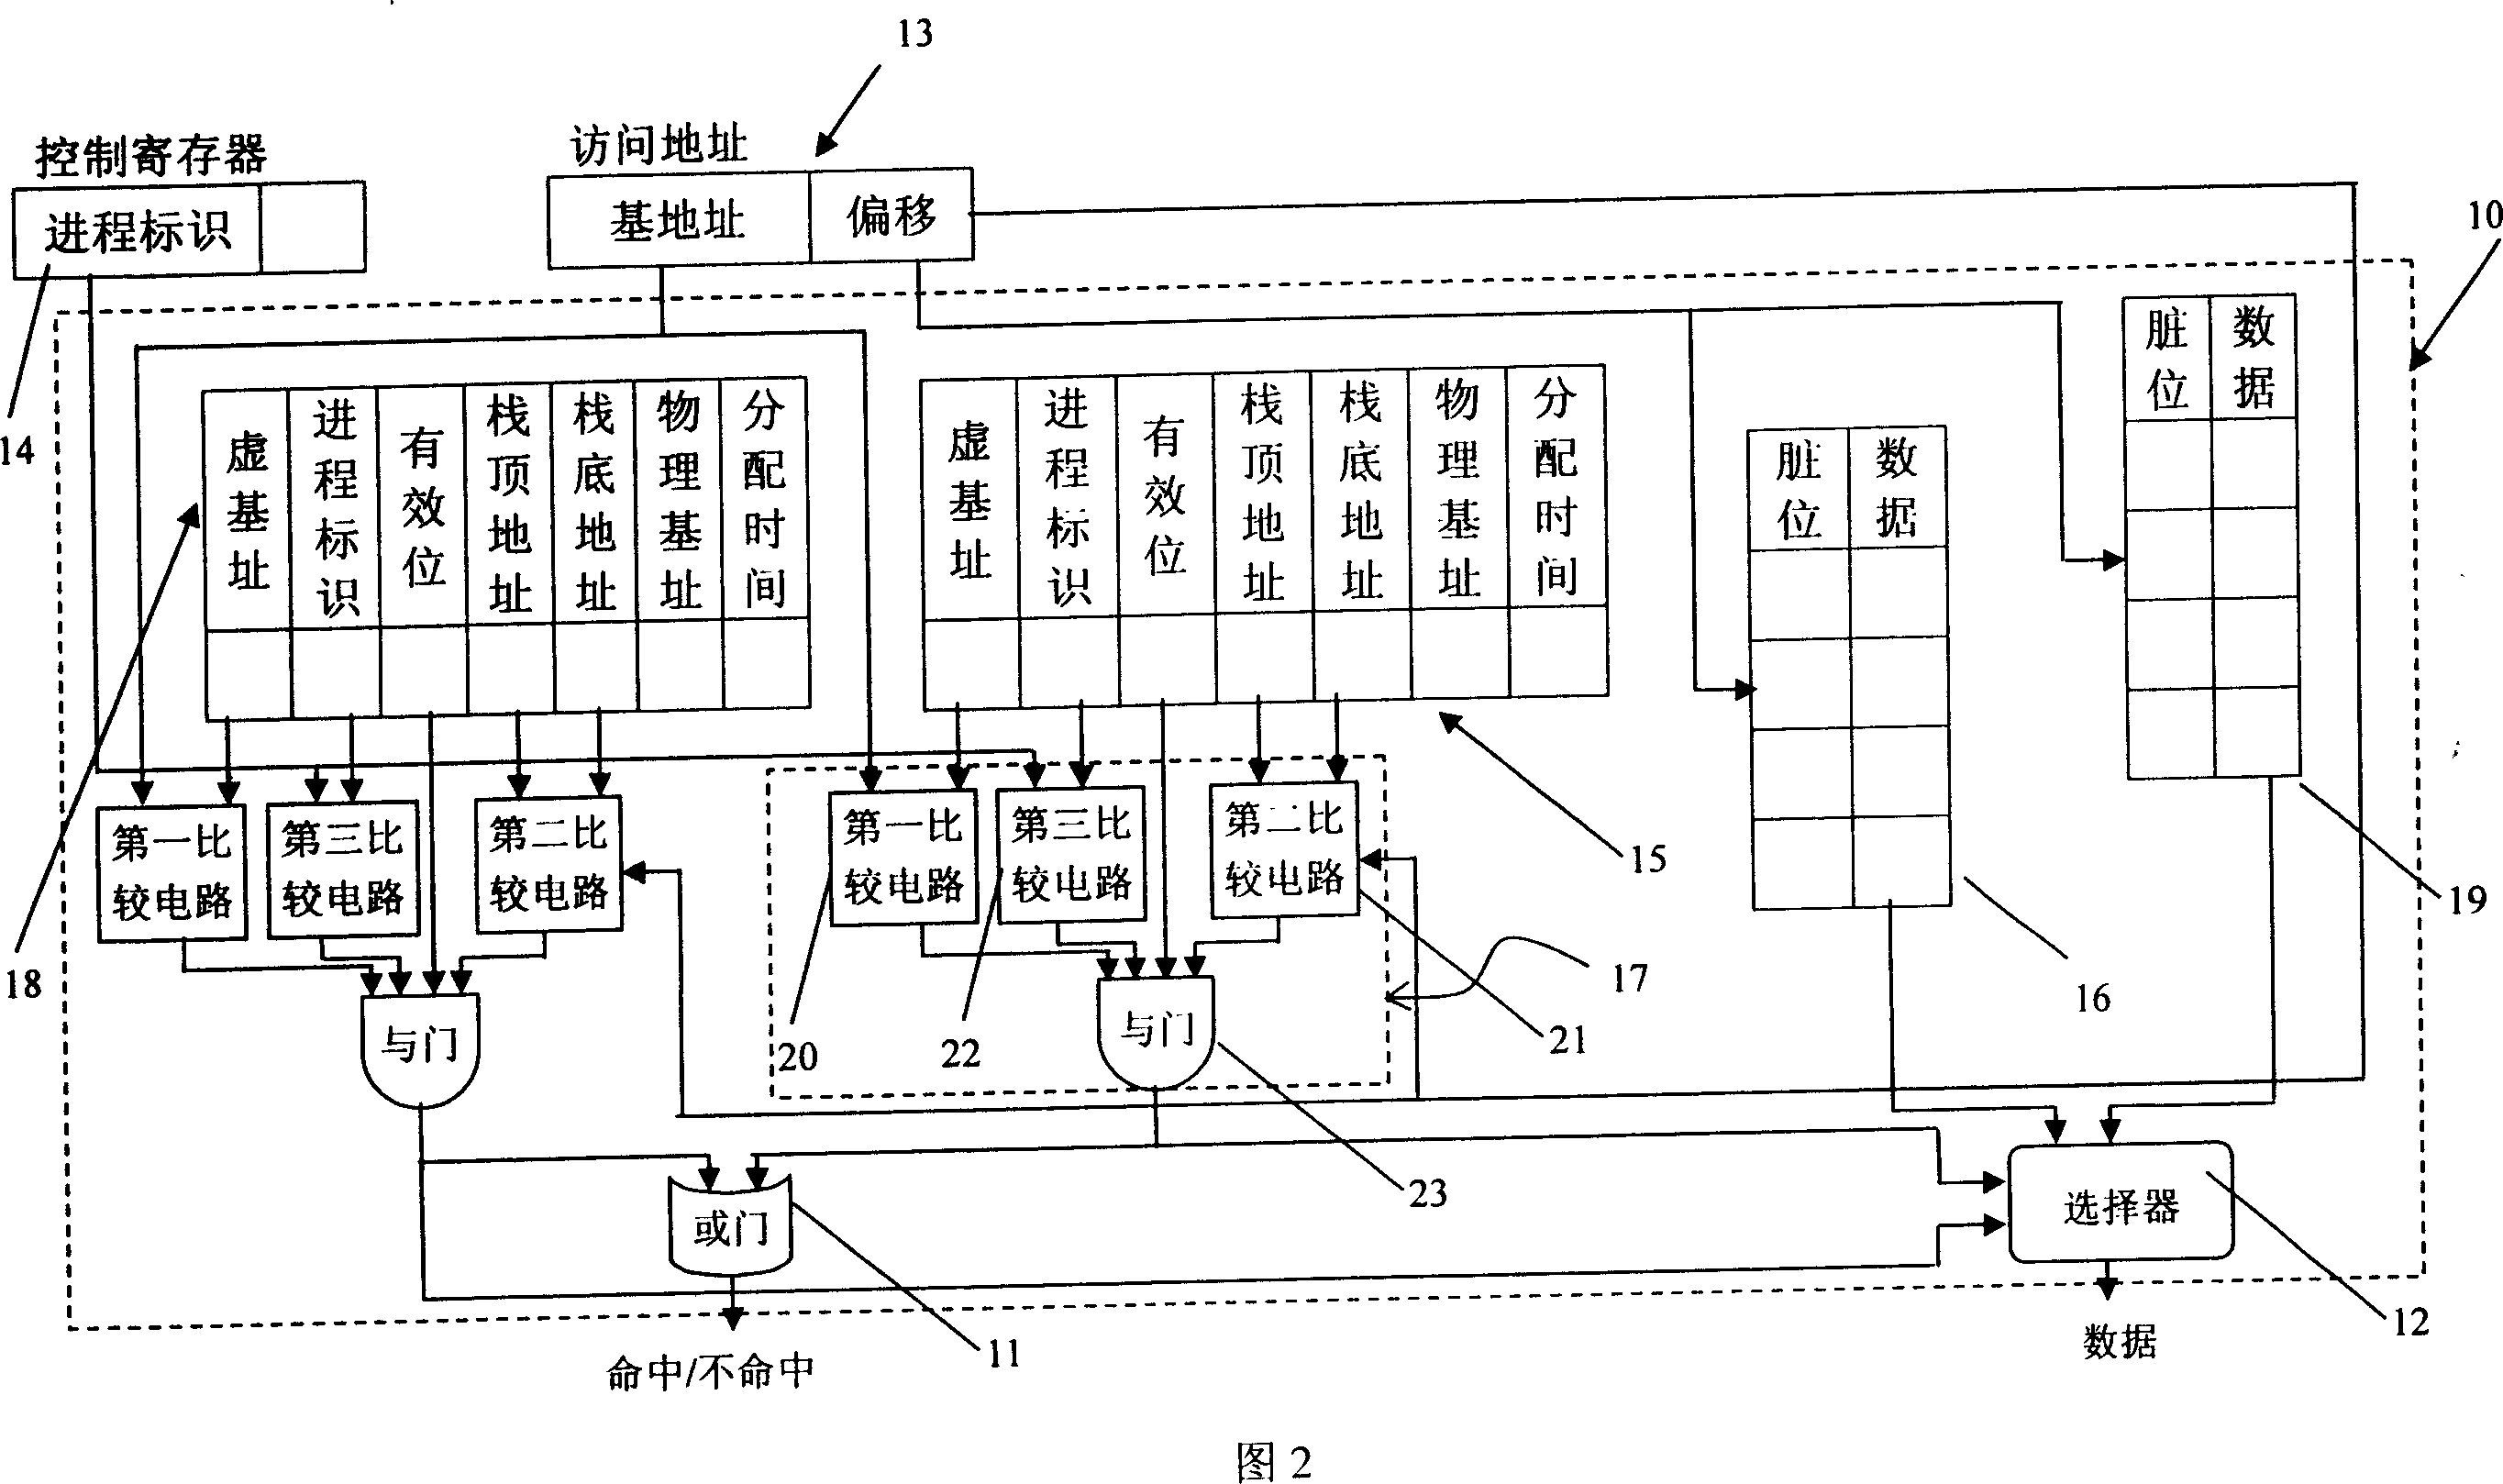 Stack cache memory applied for context switch and buffer storage method